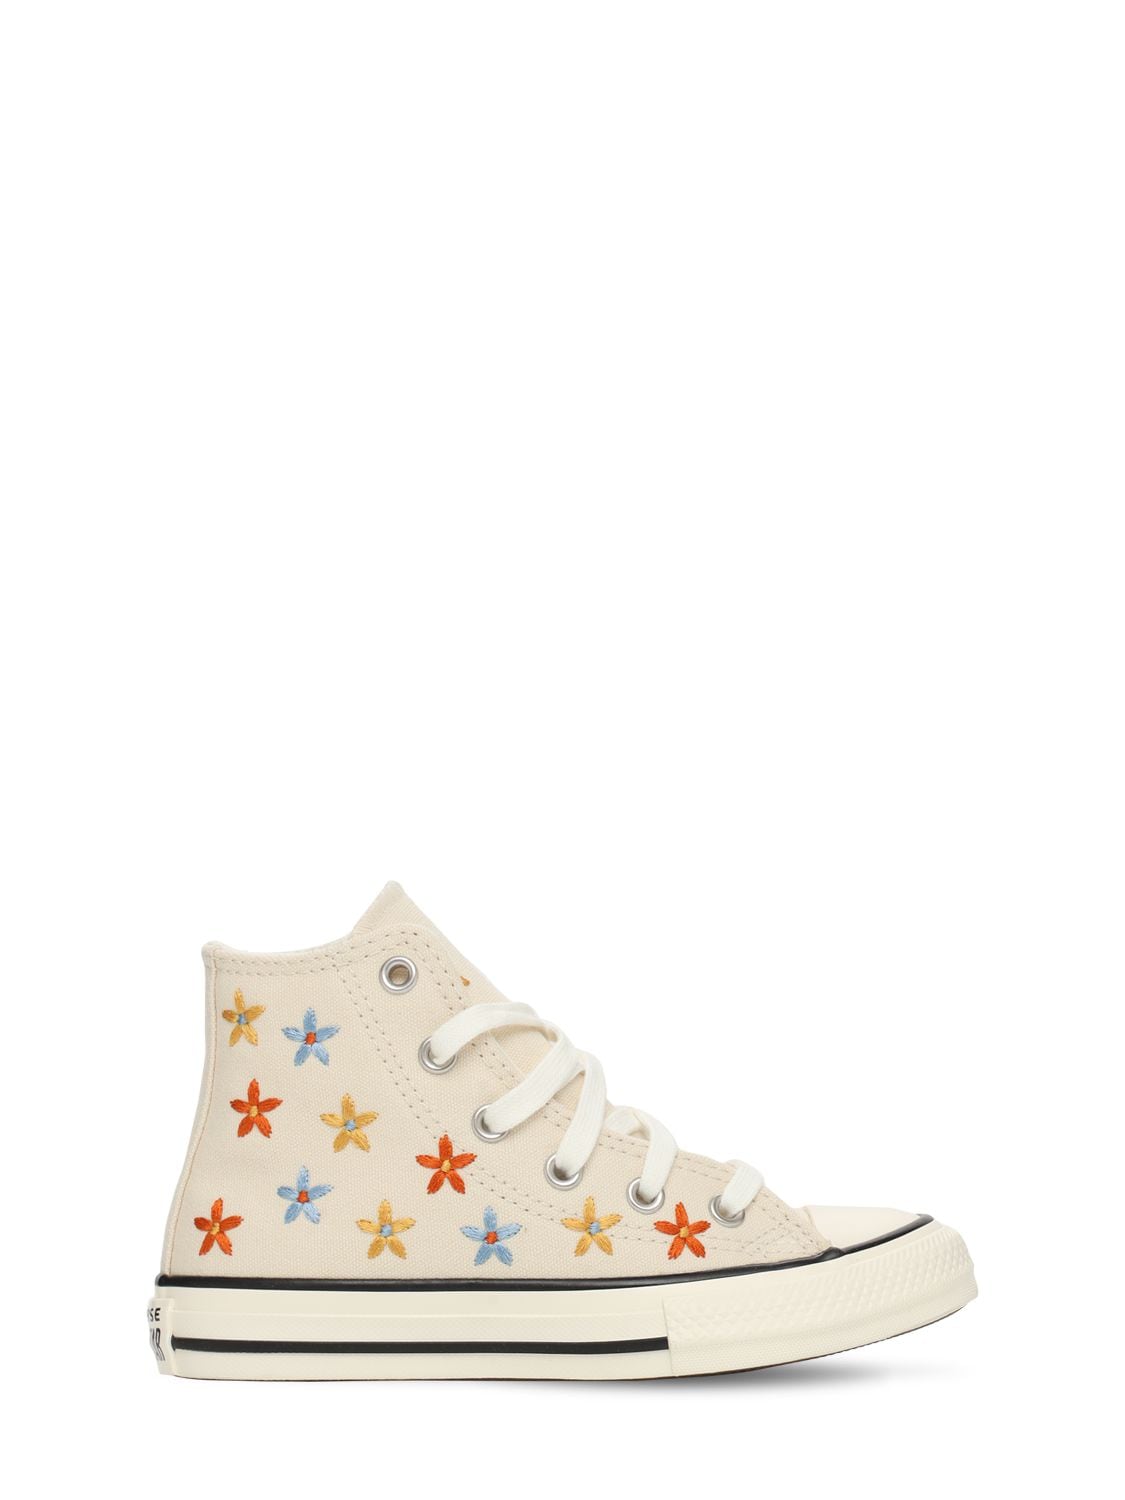 Converse Kids' Chuck 70 High Trainers In Ivory